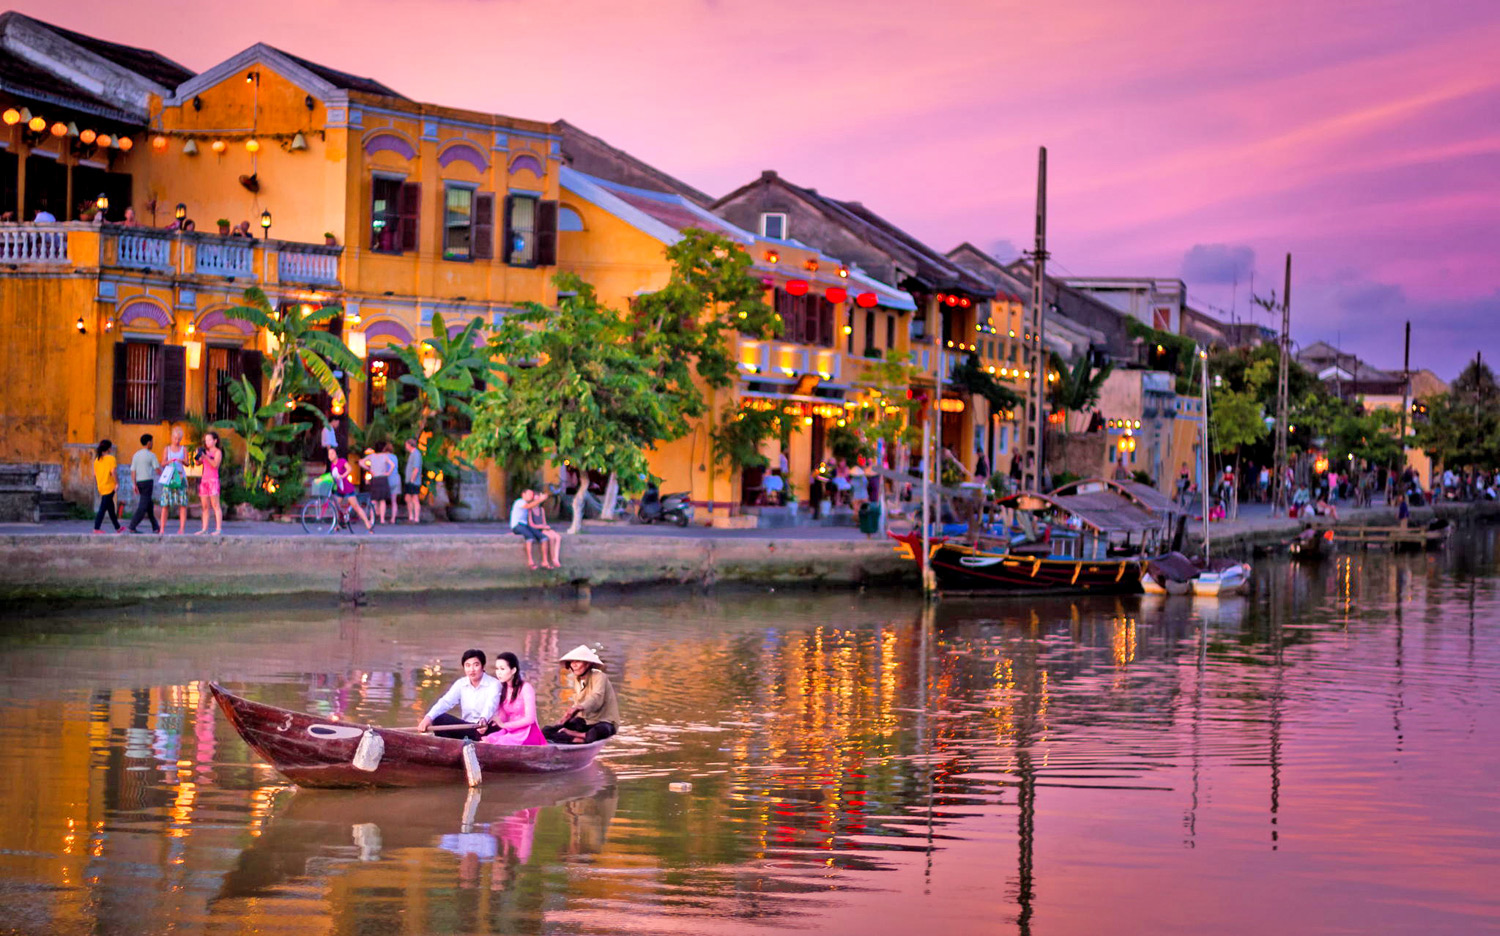 Old town Hoi An 2